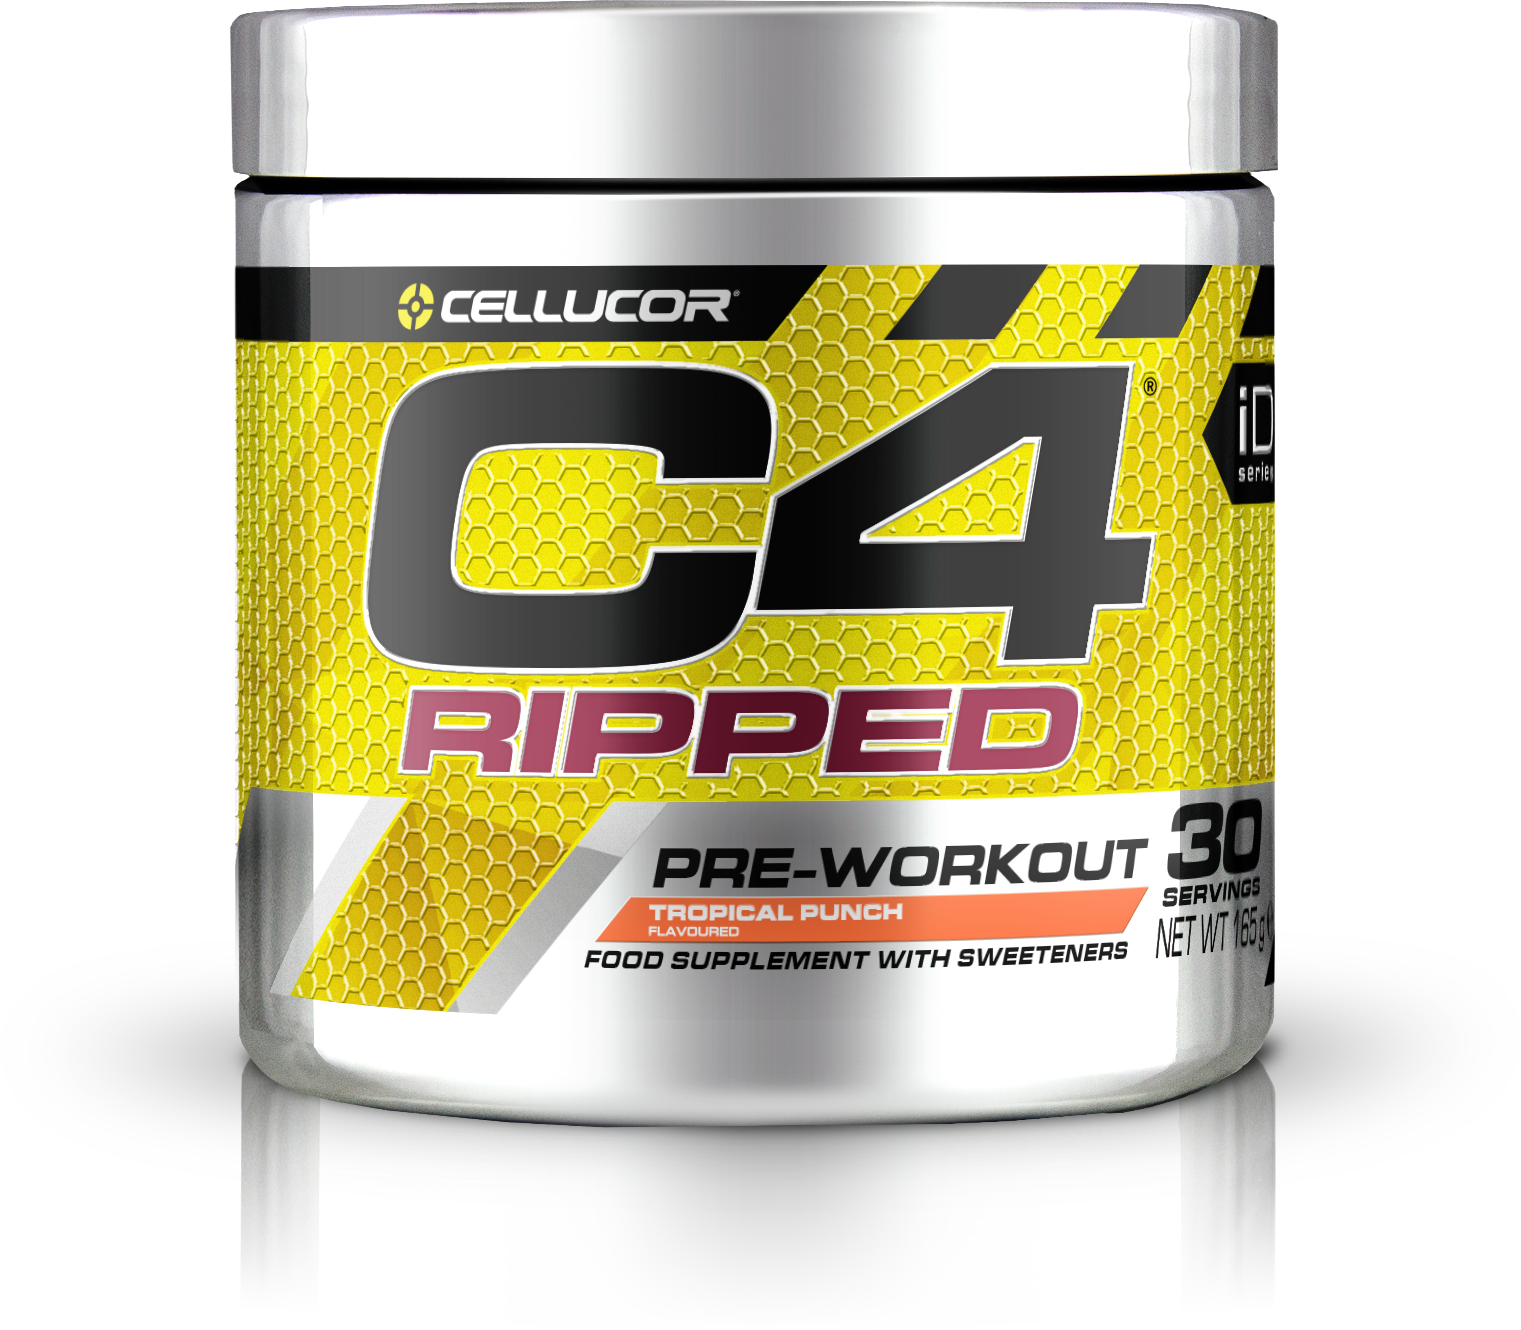 CELLUCOR - C4 RIPPED 195gr-American Fitness 2.0